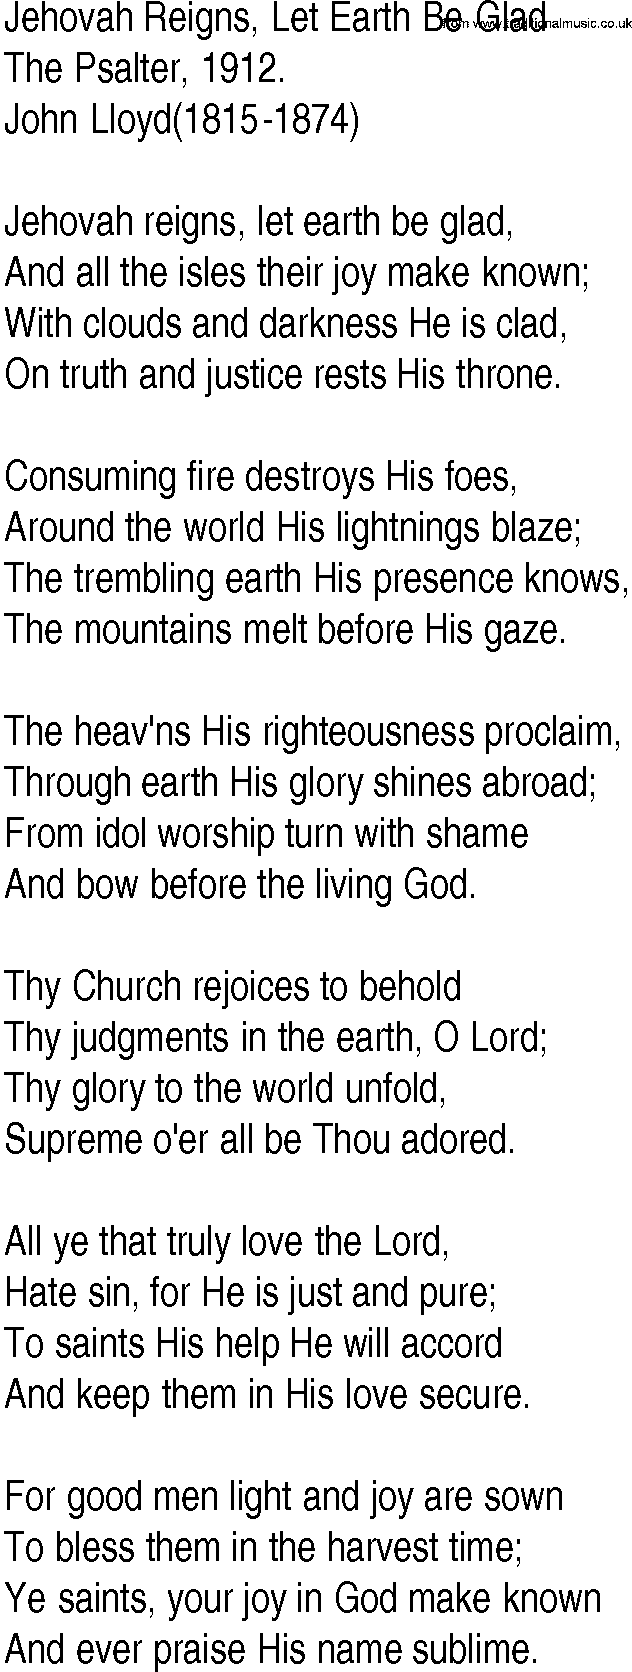 Hymn and Gospel Song: Jehovah Reigns, Let Earth Be Glad by The Psalter lyrics